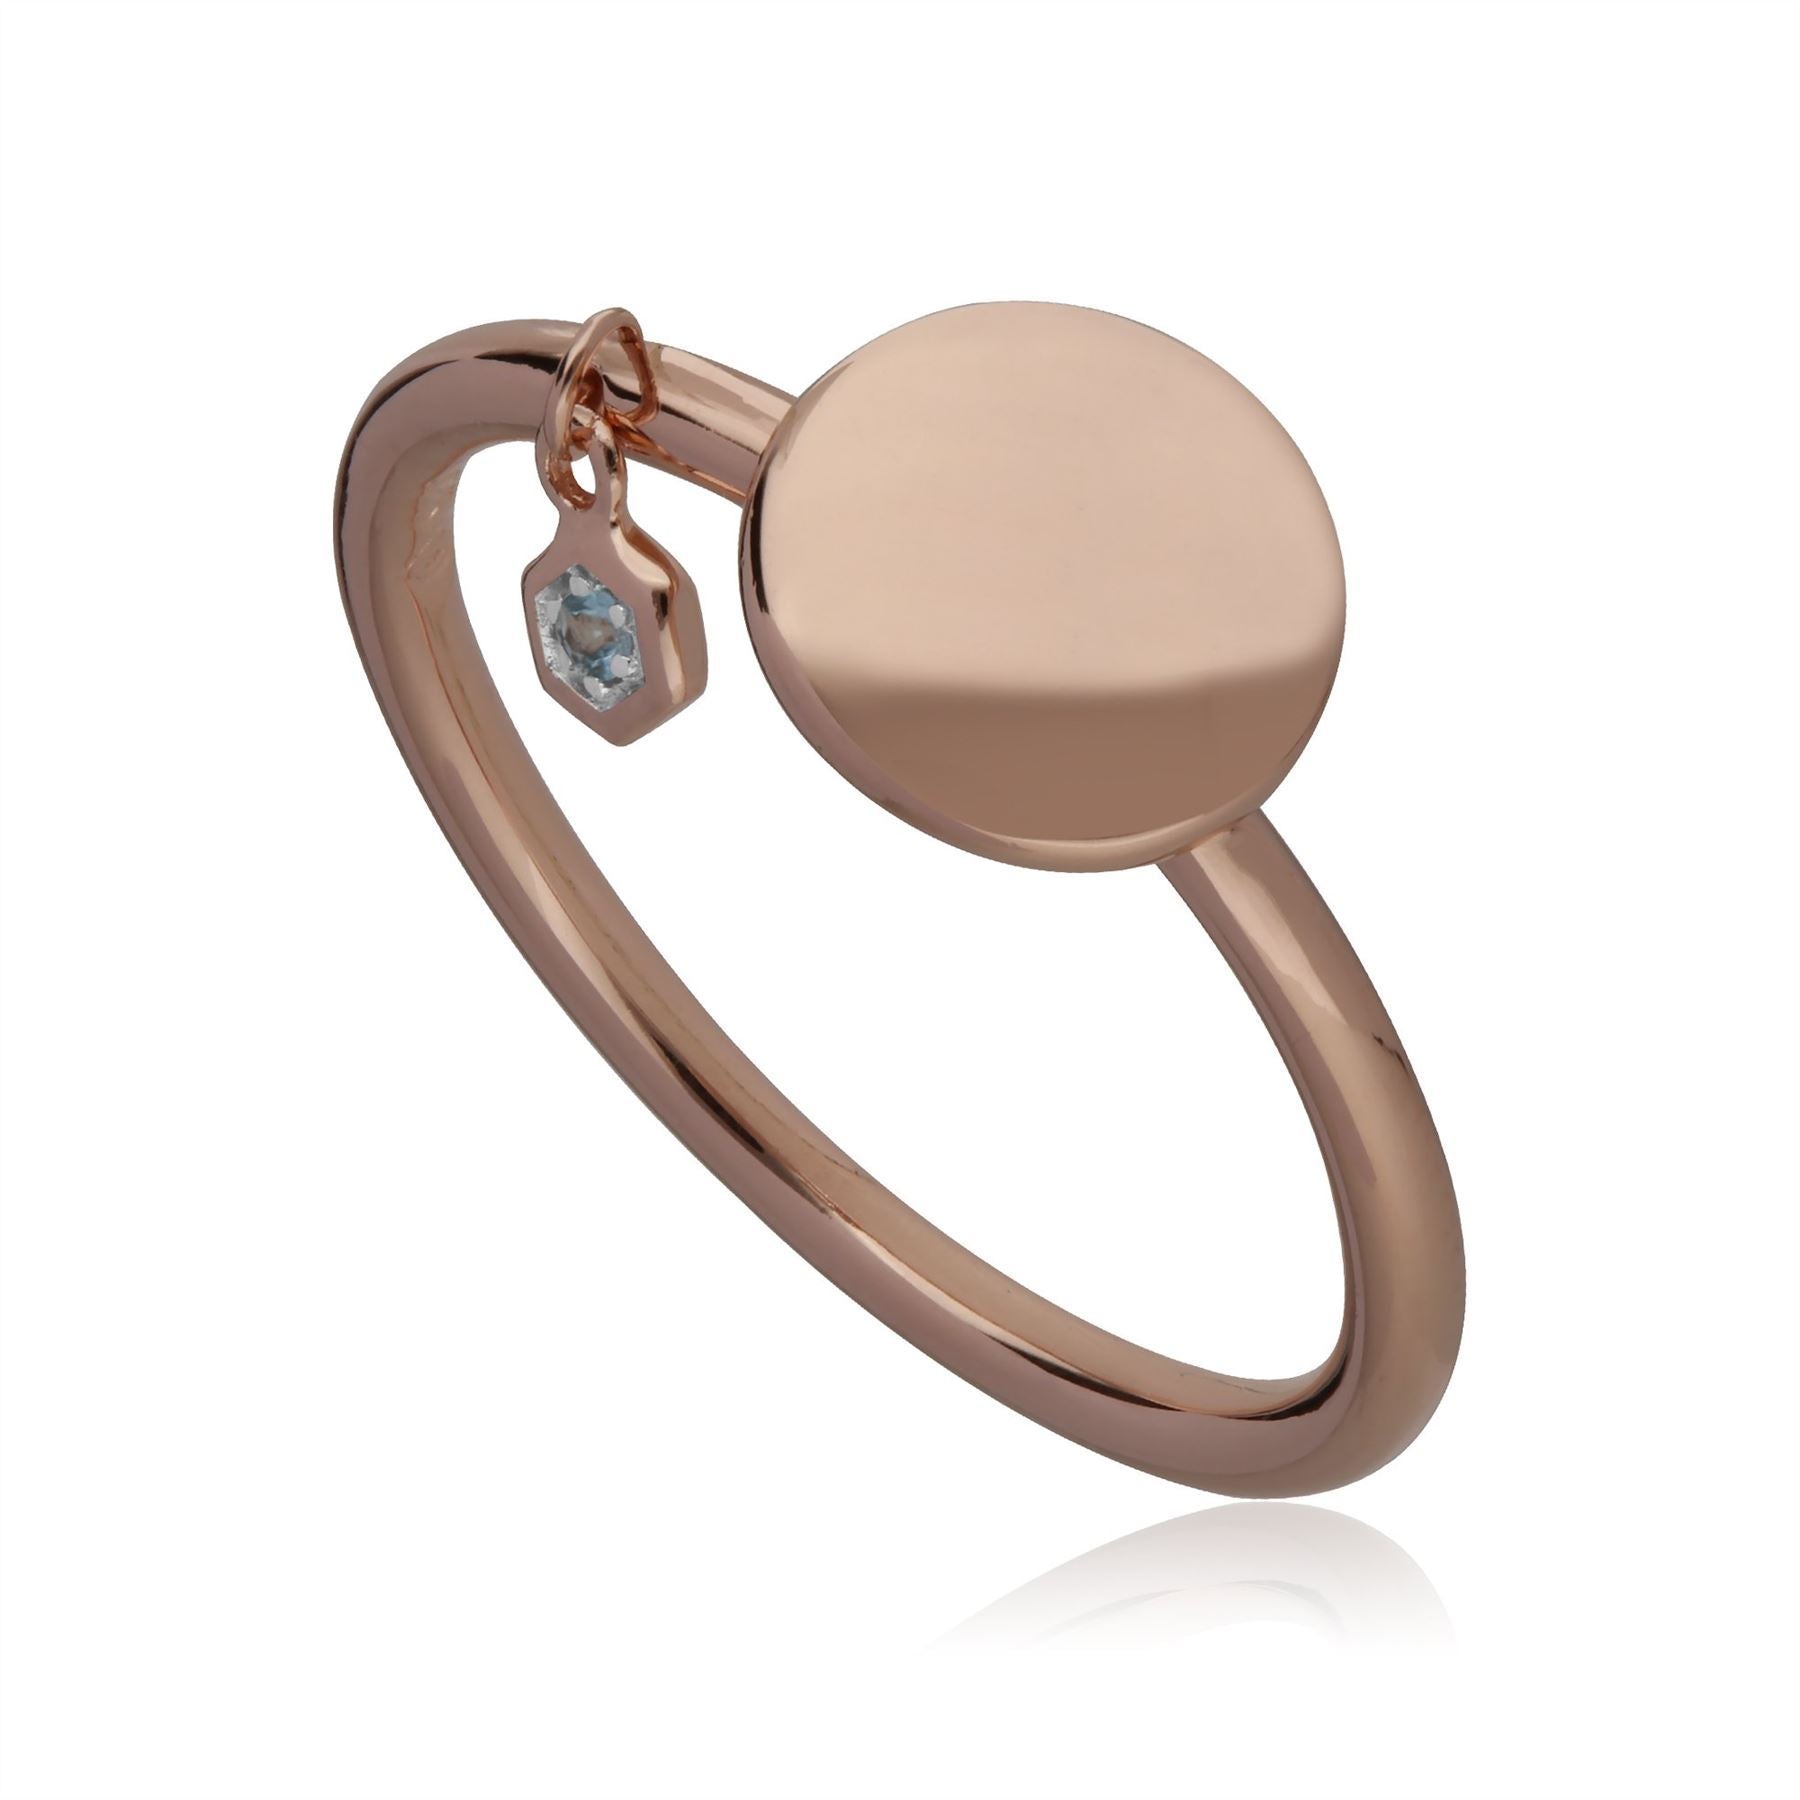 Aquamarine Engravable Ring in Rose Gold Plated Sterling Silver